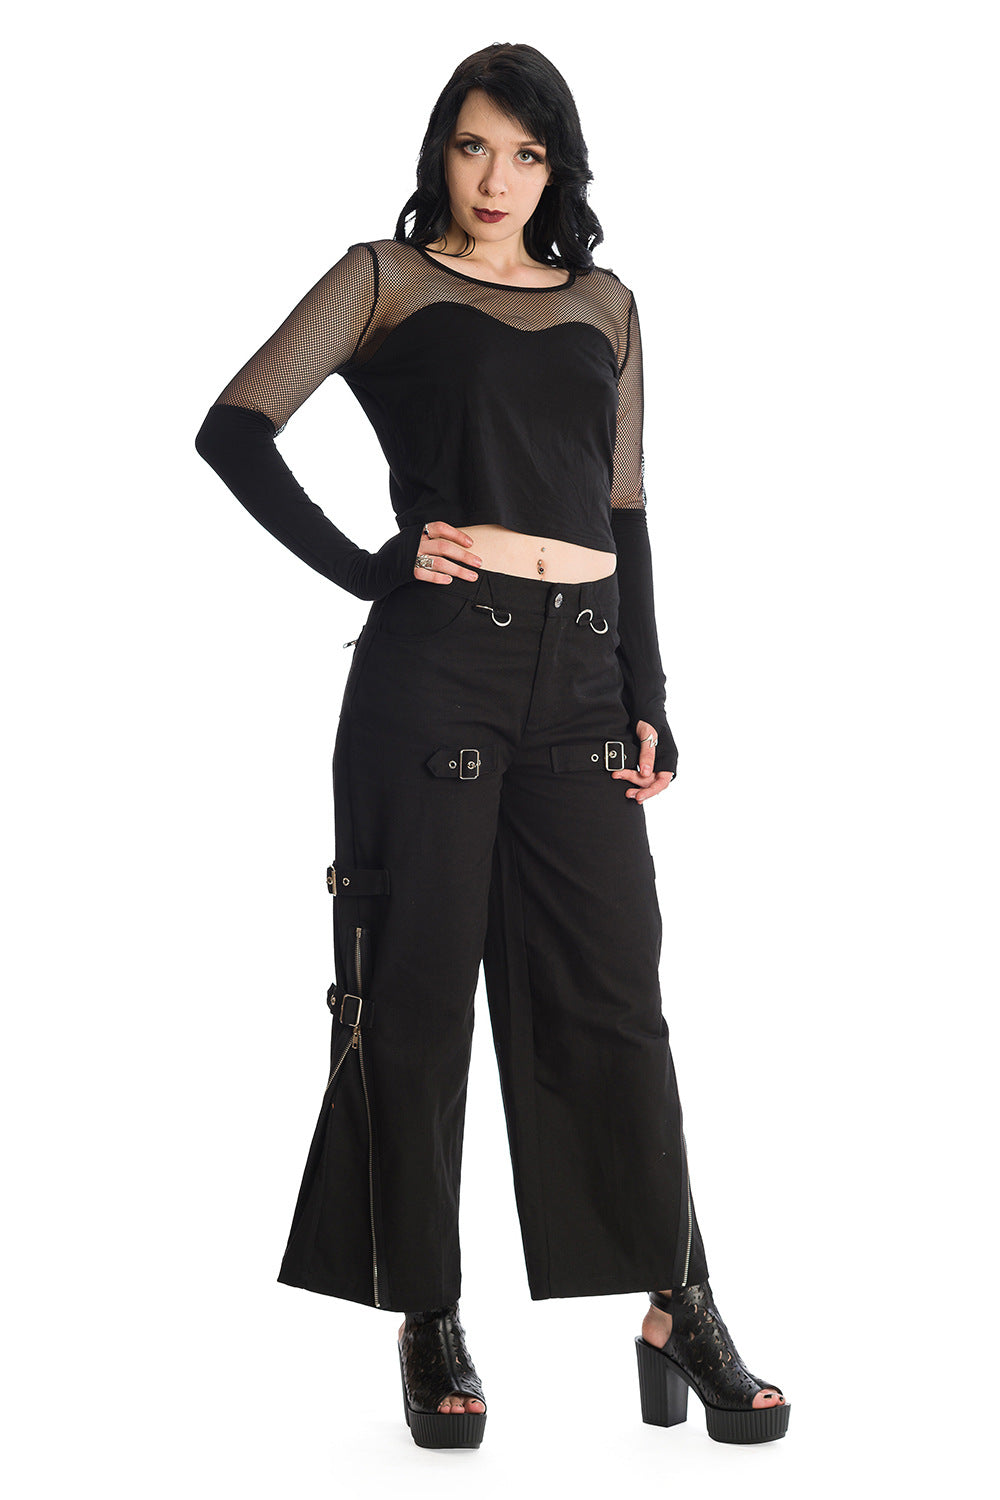 Grunge model wearing mesh long sleeve top with thumb holes in black with oversized black trousers with buckles 